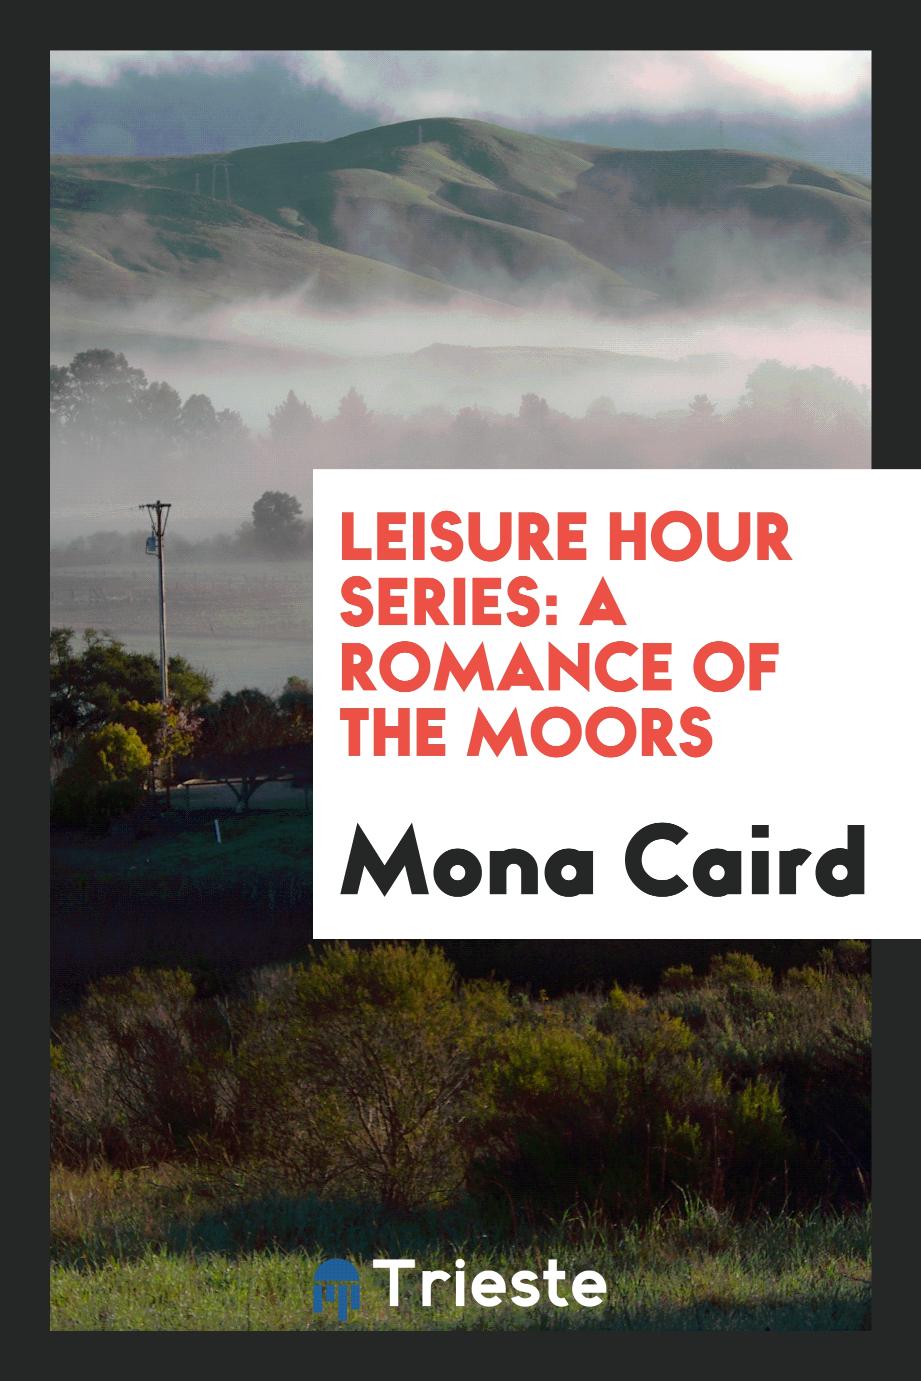 Leisure Hour Series: A Romance of the Moors